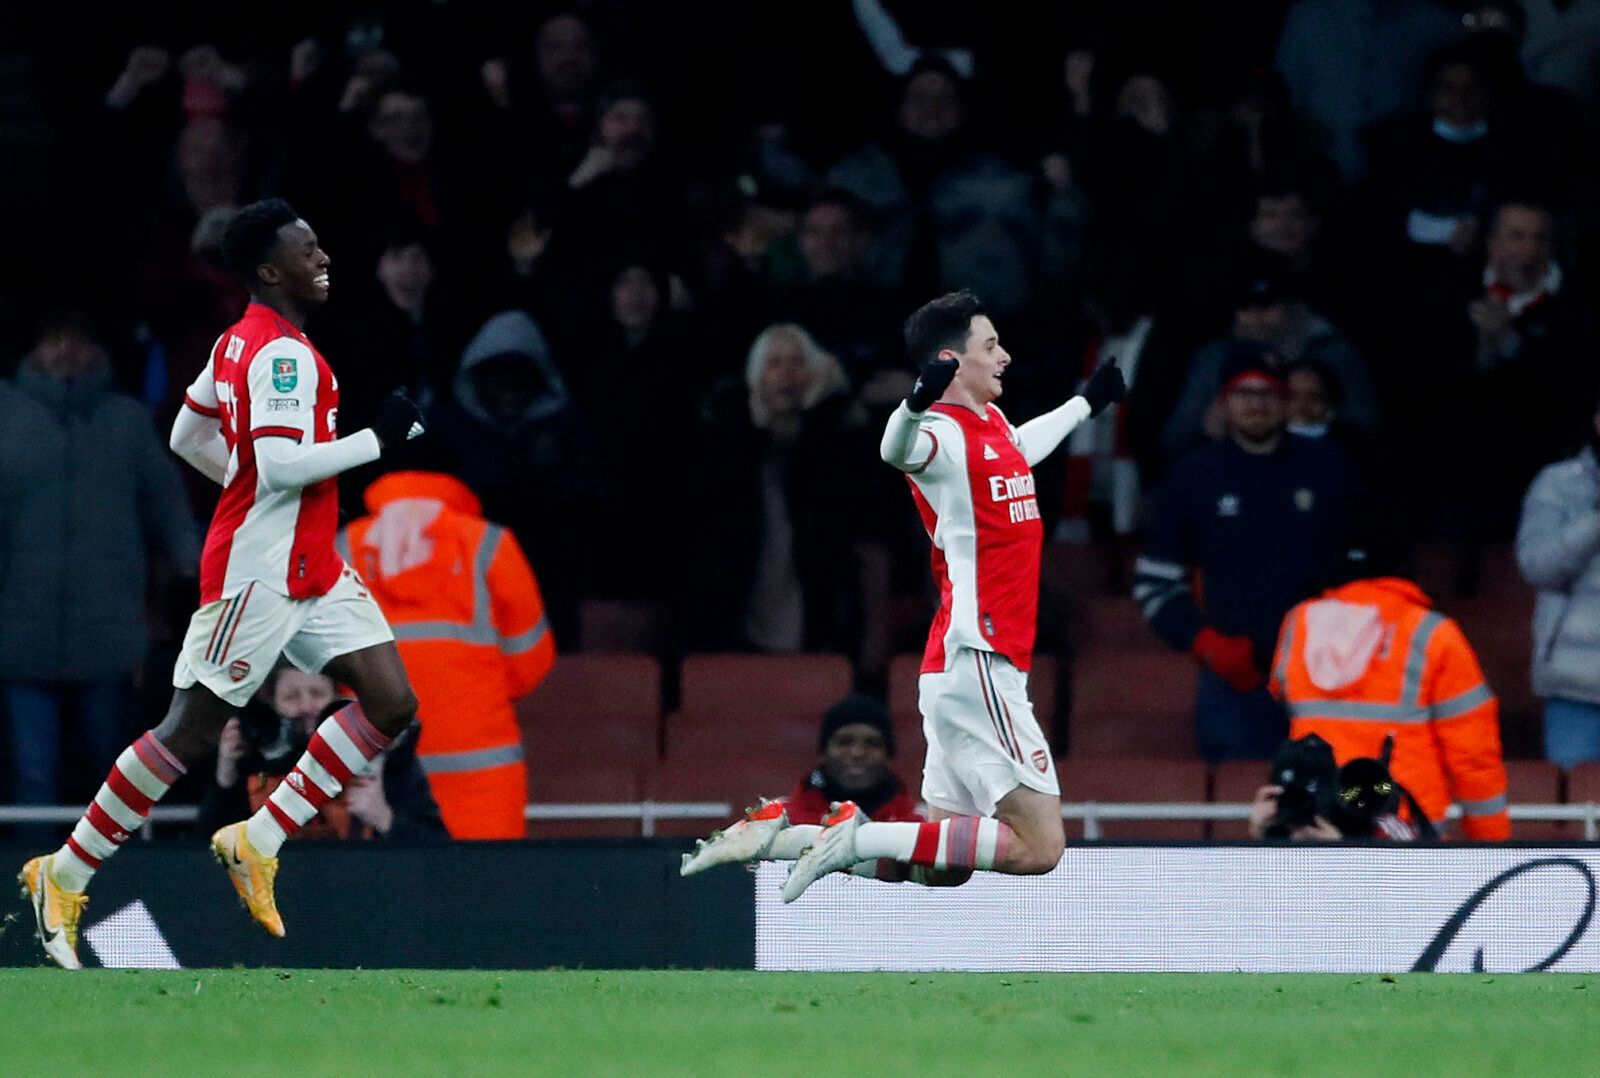 Soccer Football - Carabao Cup - Quarter Final - Arsenal v Sunderland - Emirates Stadium, London, Britain - December 21, 2021 Arsenal's Charlie Patino celebrates scoring their fifth goal Action Images via Reuters/Lee Smith EDITORIAL USE ONLY. No use with unauthorized audio, video, data, fixture lists, club/league logos or 'live' services. Online in-match use limited to 75 images, no video emulation. No use in betting, games or single club /league/player publications.  Please contact your account 